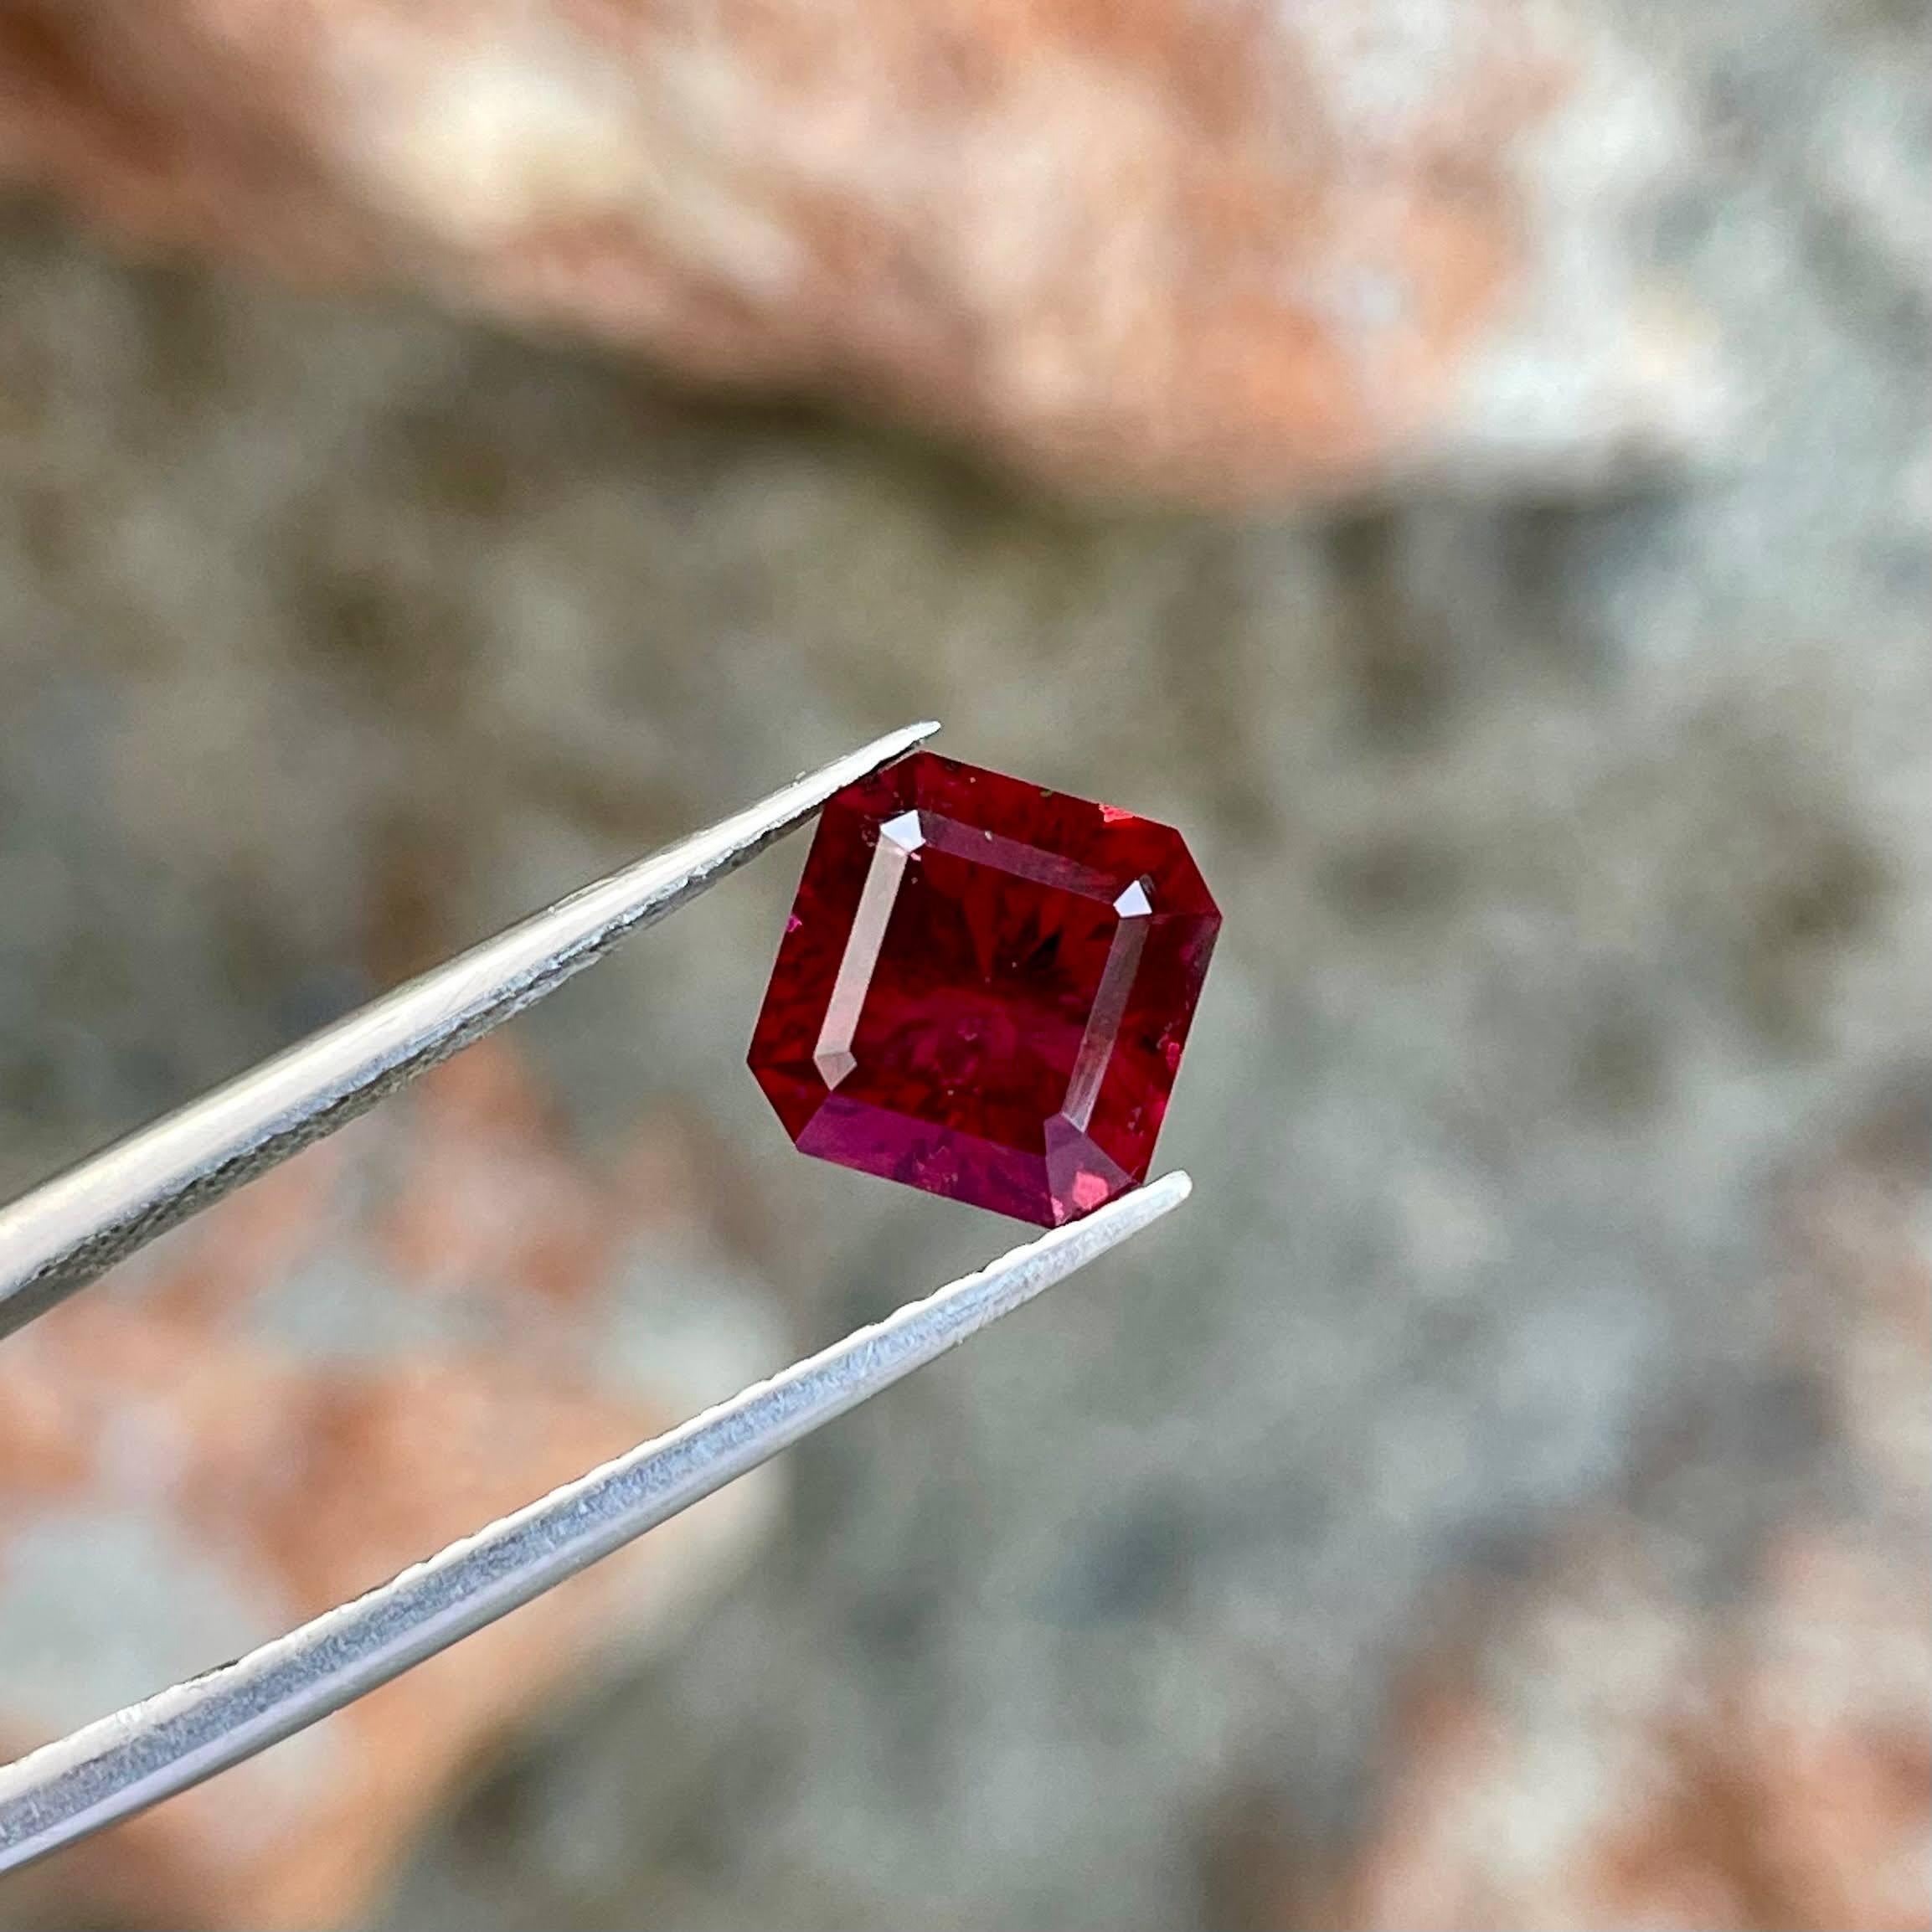 Weight 2.75 carats 
Dimensions 7.3x7.2x5.52 mm
Treatment none 
Origin Africa 
Clarity SI 
Shape octagon 
Cut Asscher 




Behold the exquisite allure of this 2.75 carat Vivid Red Garnet Stone, fashioned in the revered Asscher cut, emanating from the